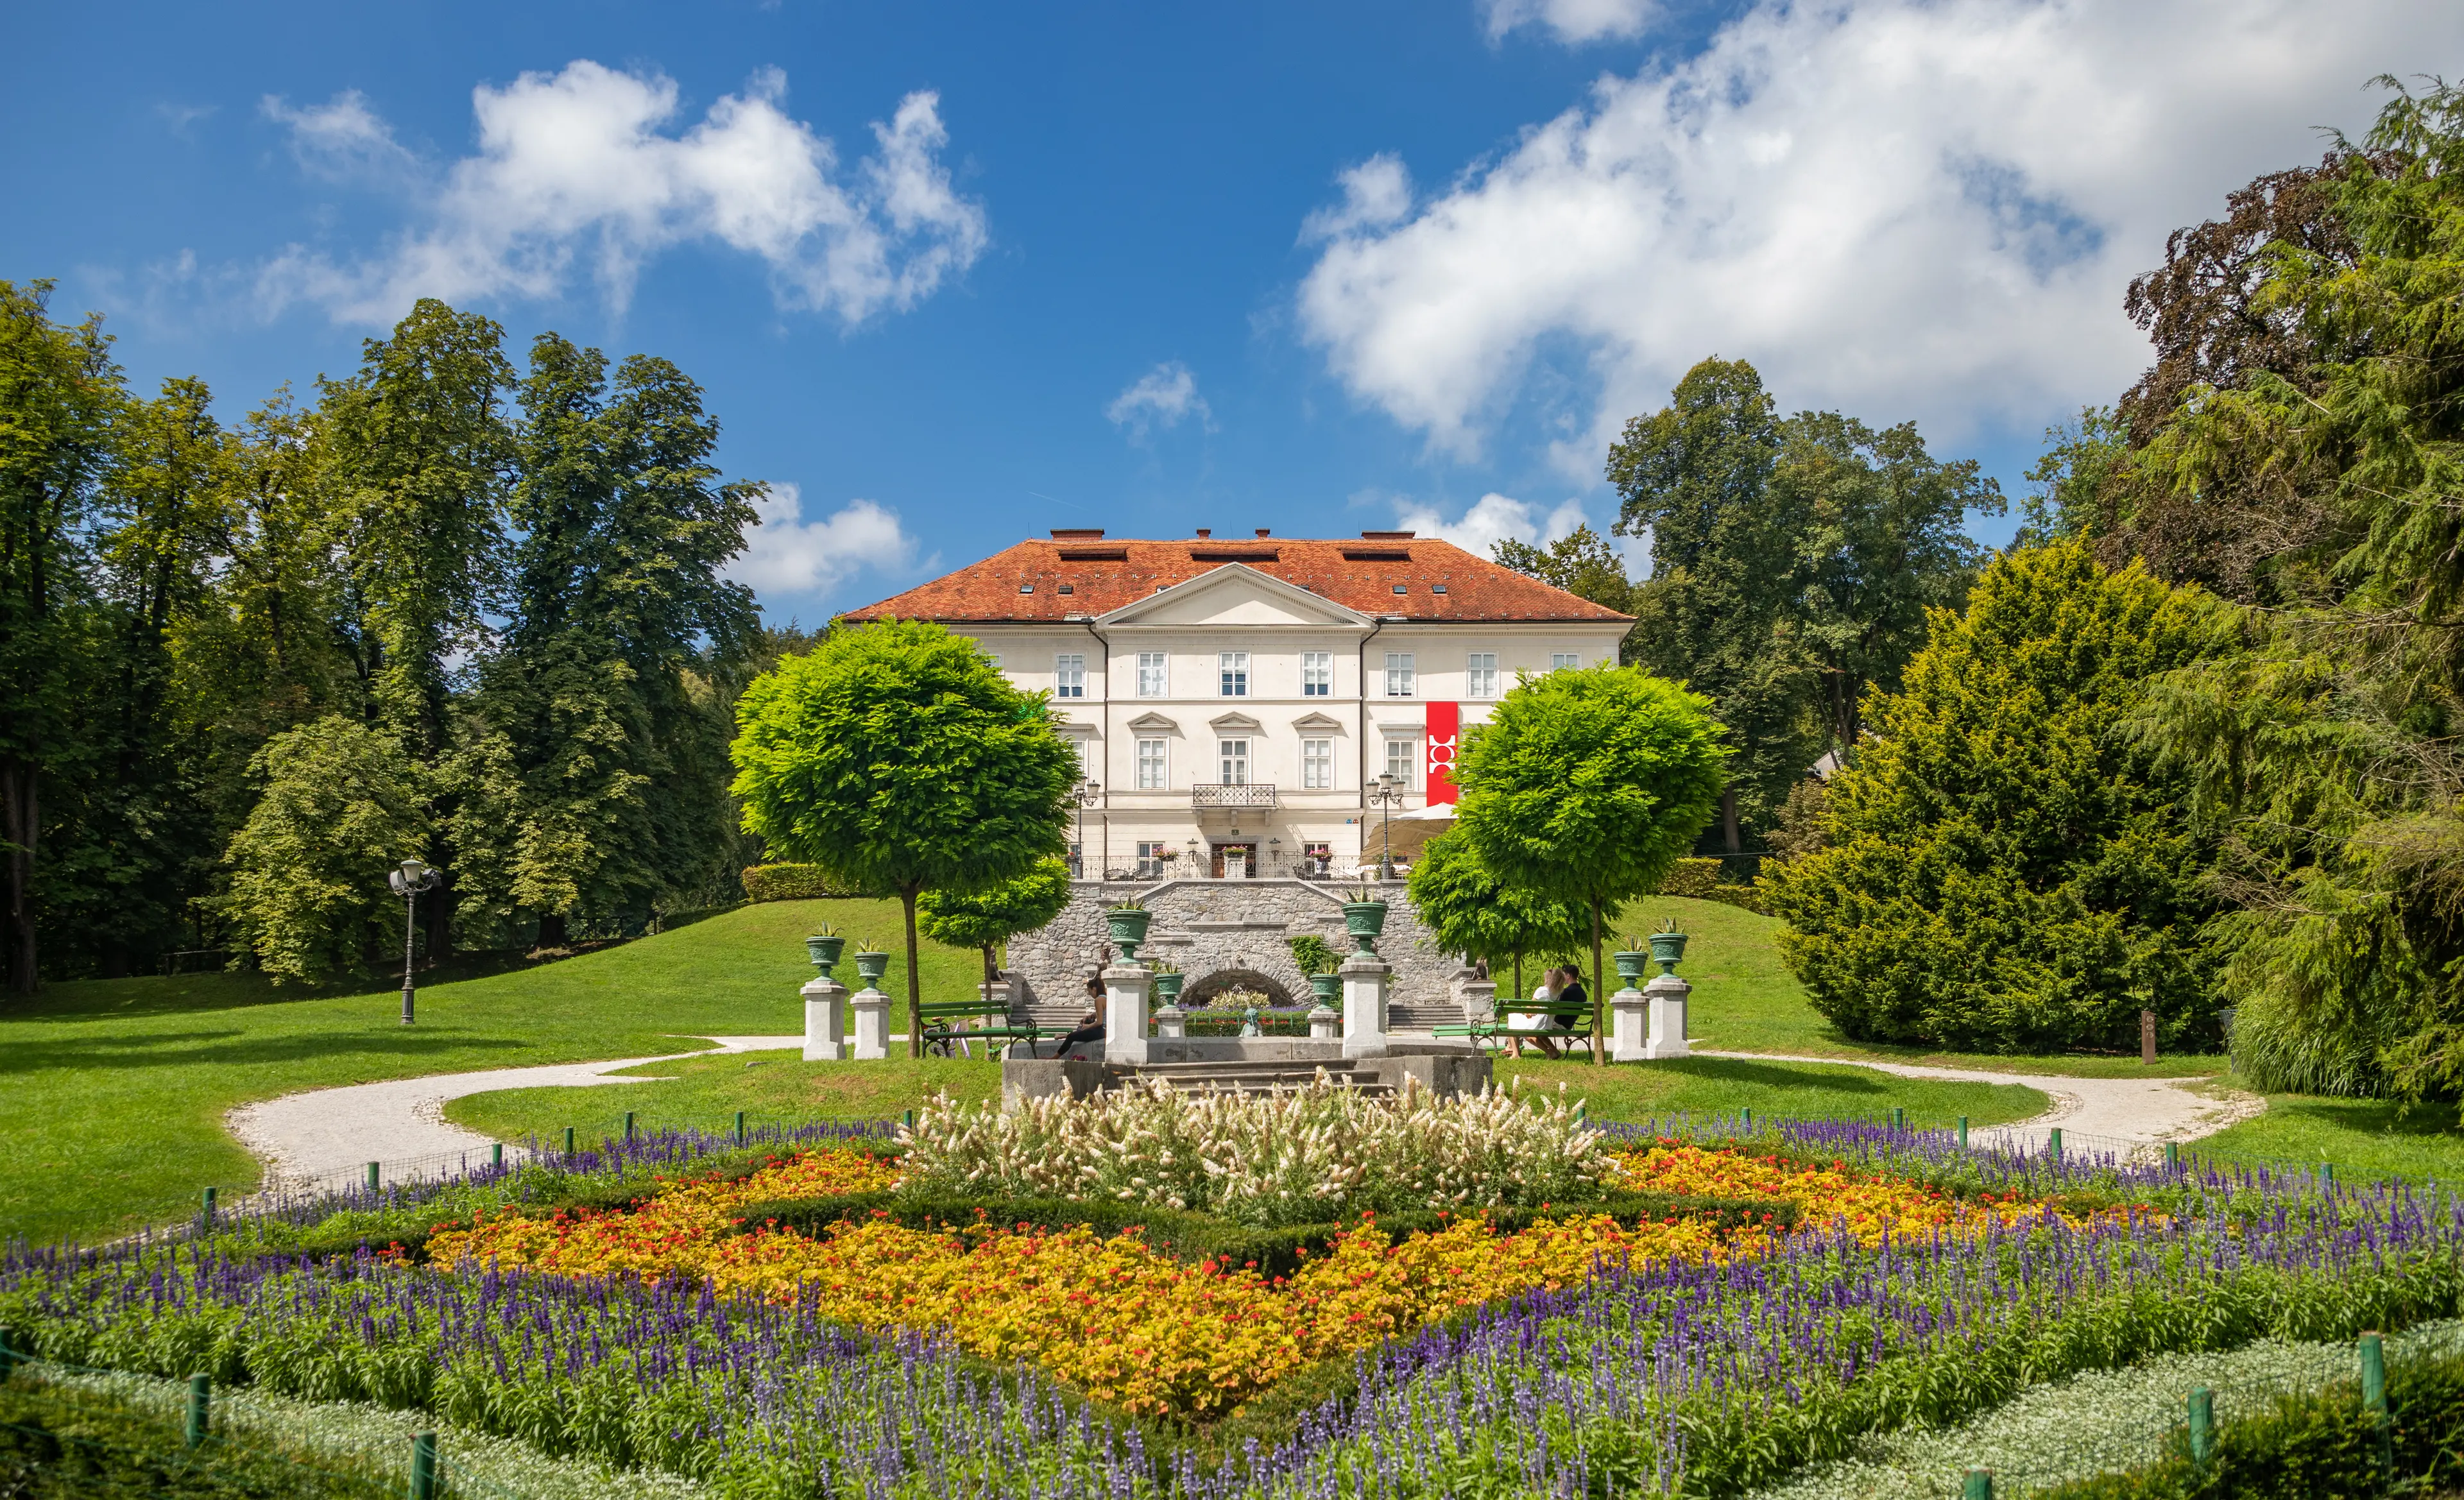 3-Day Local Food, Wine and Adventure Itinerary in Ljubljana